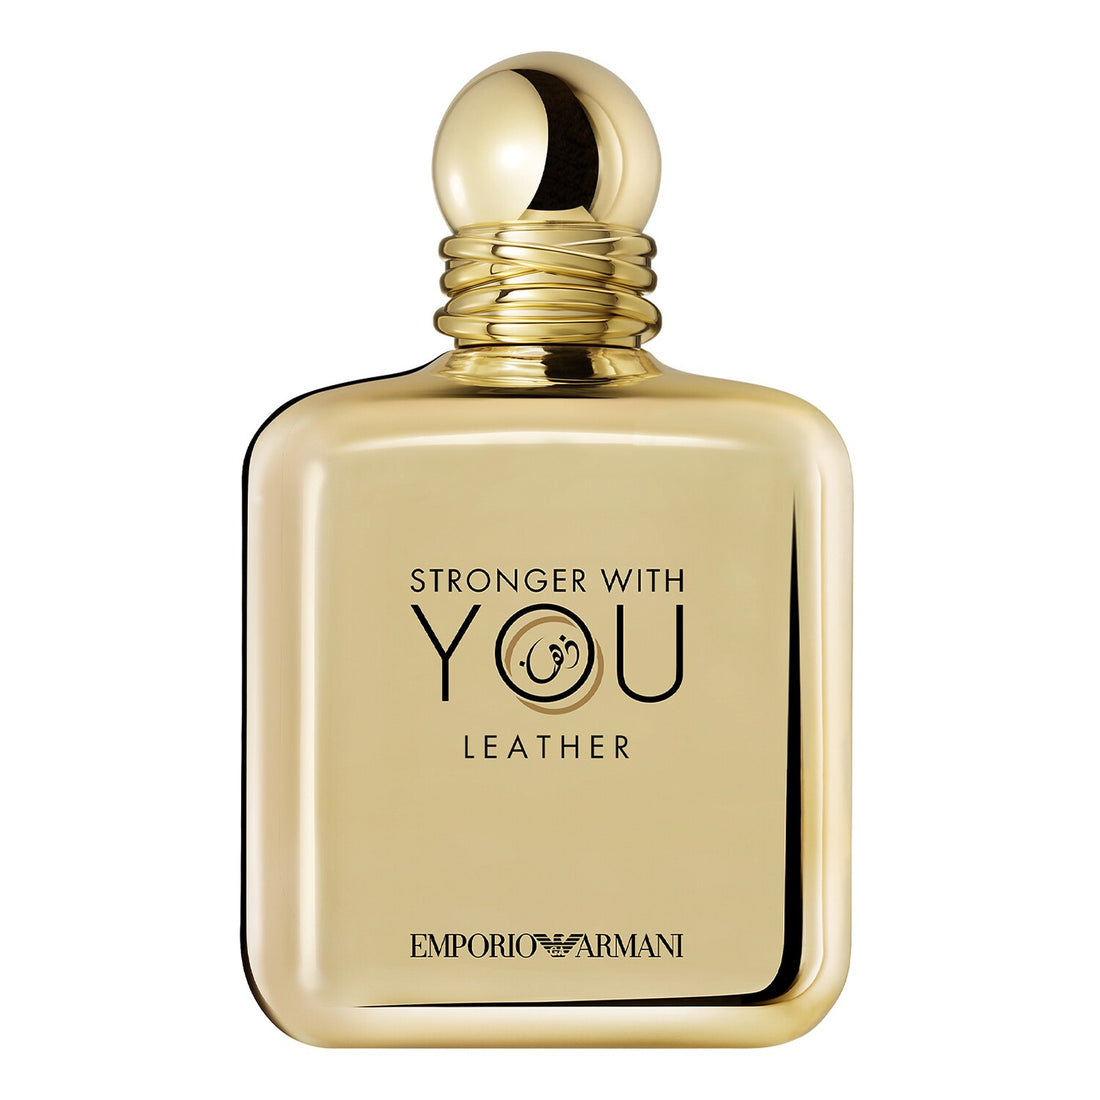 Giorgio Armani Stronger With You Leather Exclusive Edition For Him Eau de Parfum 50ml